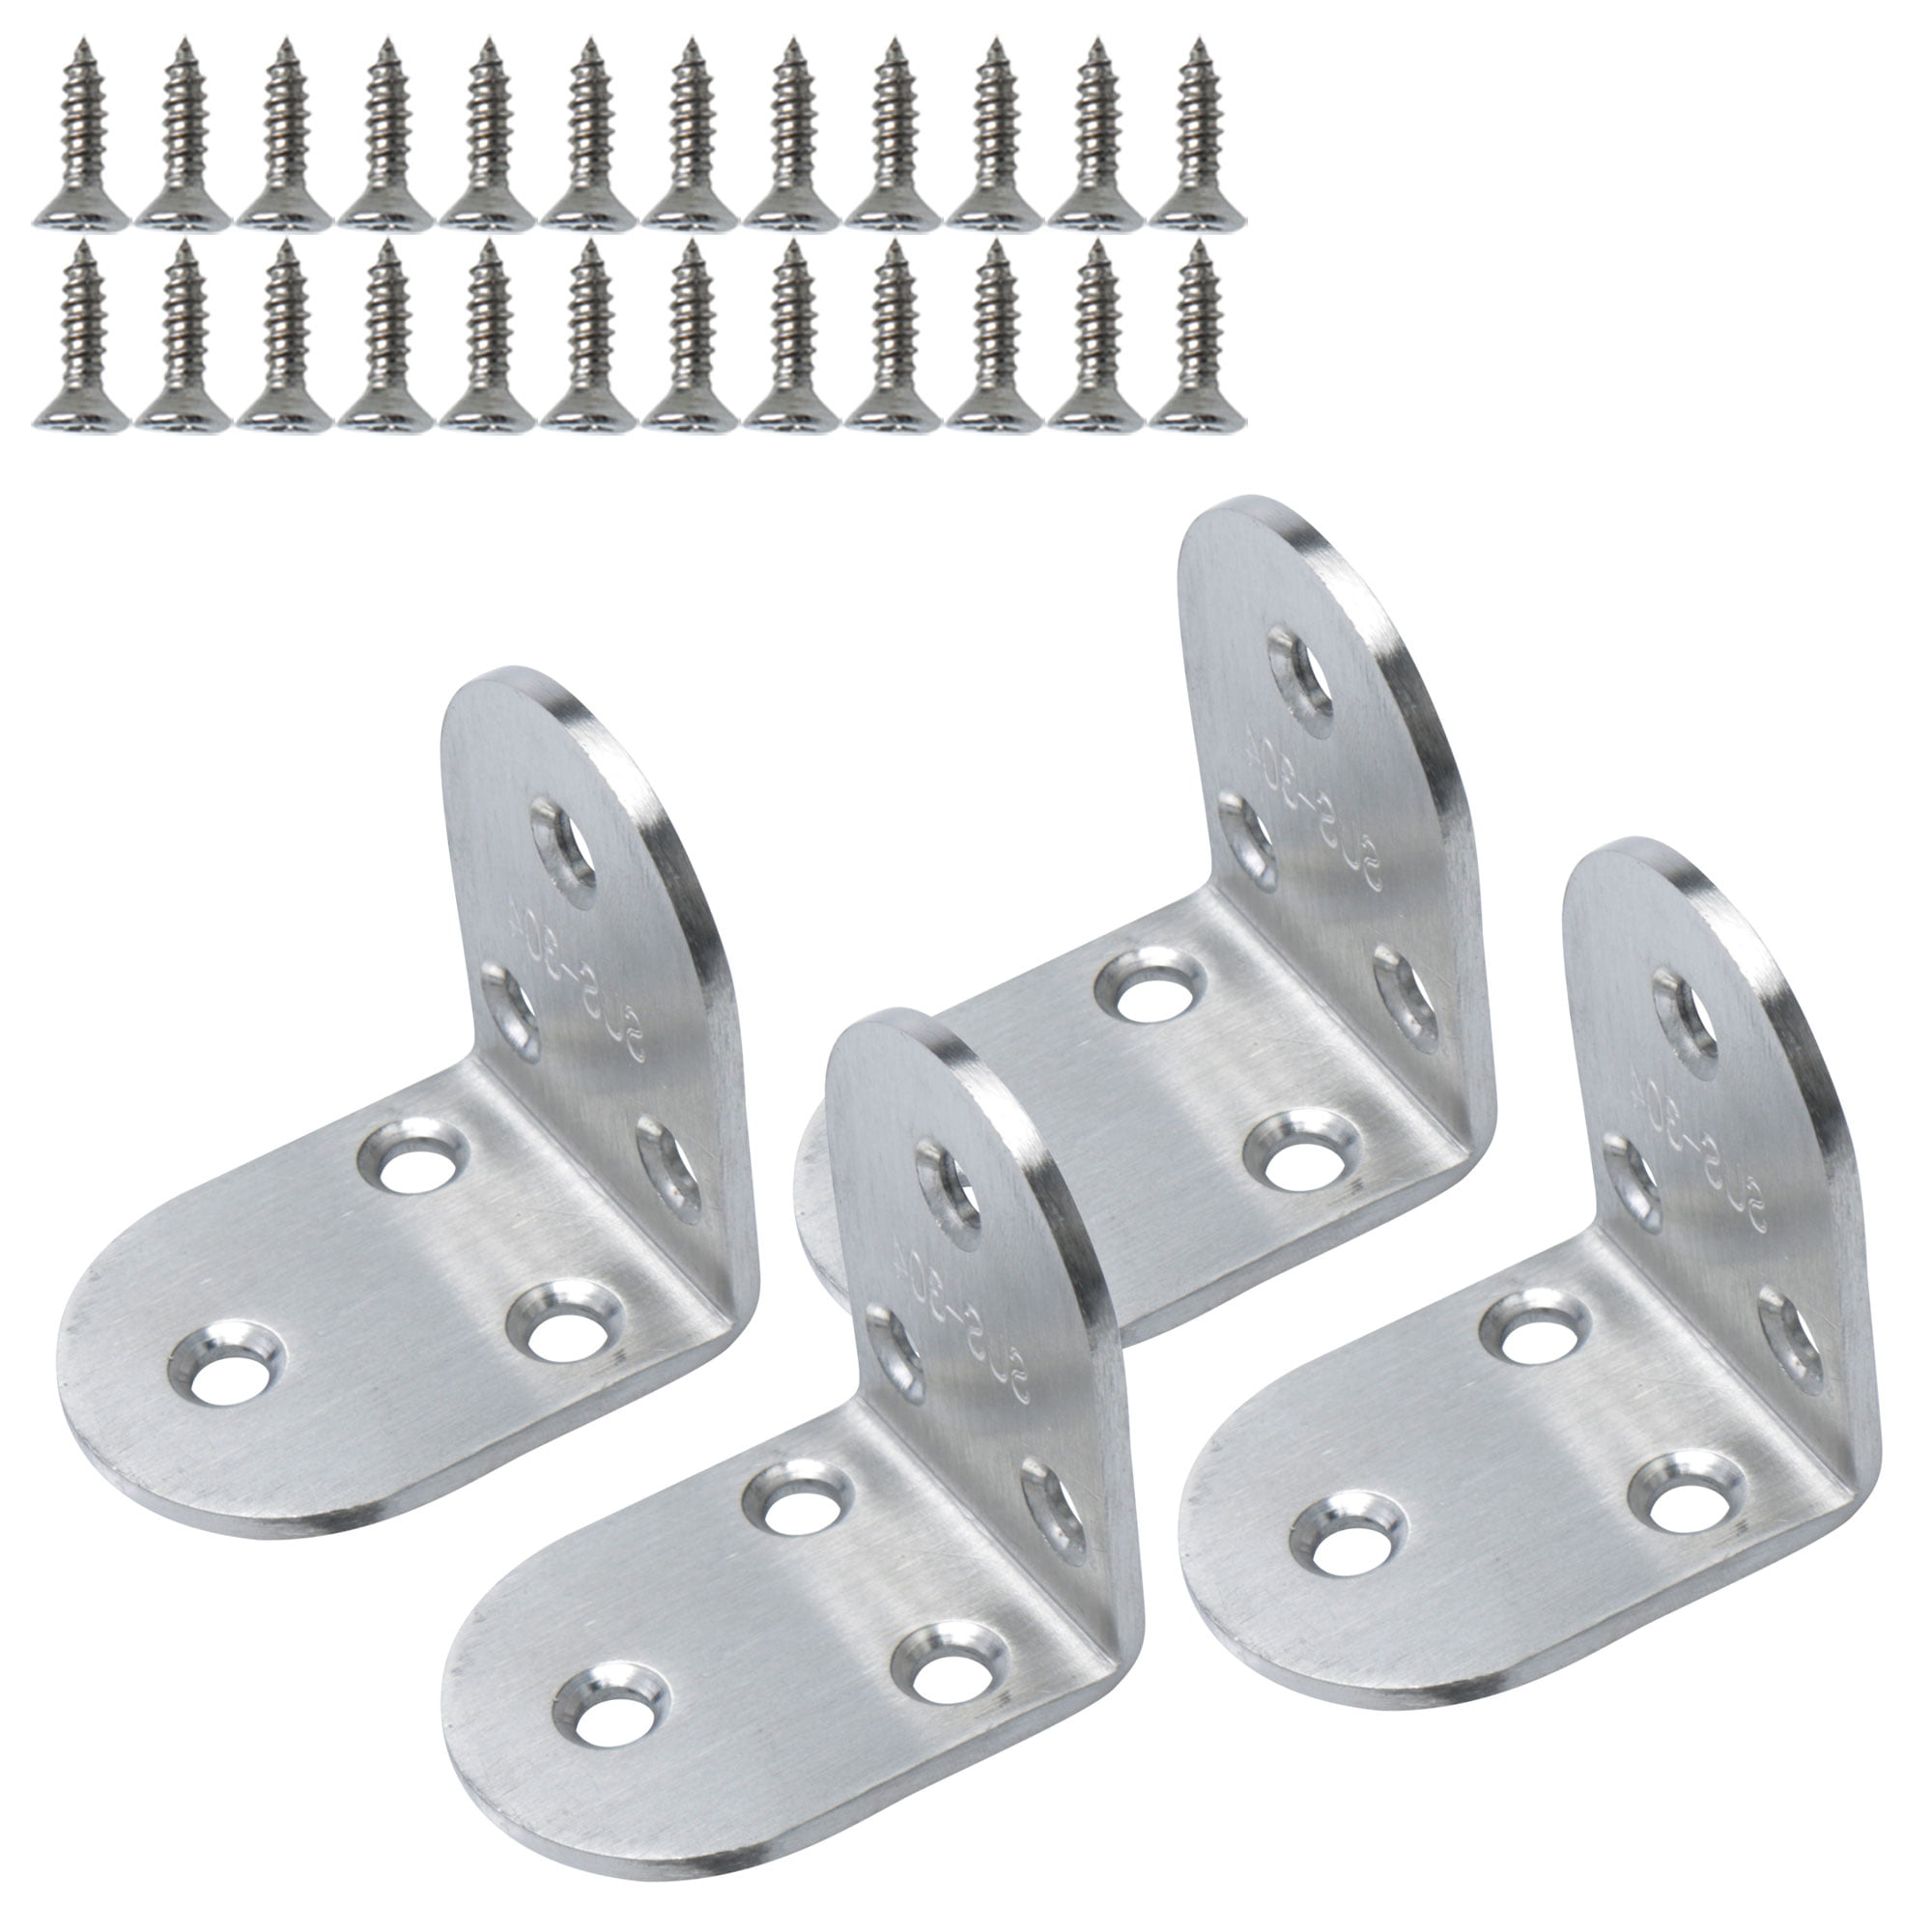 50 x 50mm Angle Bracket Stainless Steel L Shaped Right Angle Brackets